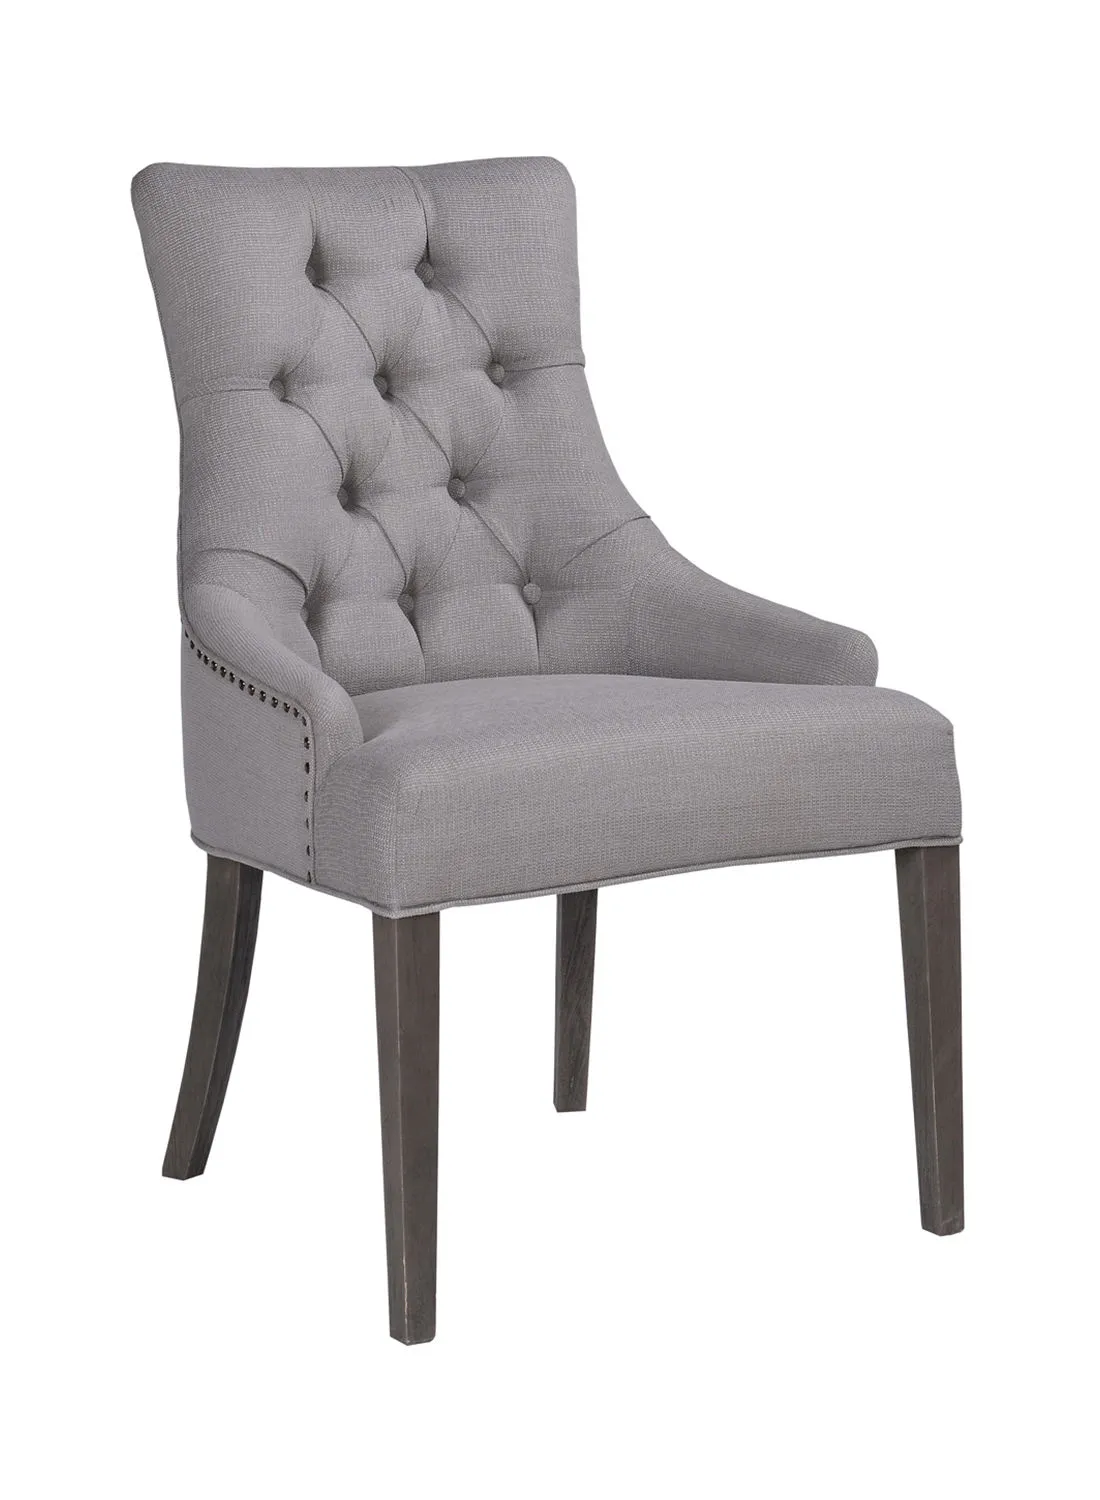 ebb & flow Dining Chair Luxurious - In Oak/Grey Wooden Chair Size 59.5 X 68.5 X 99